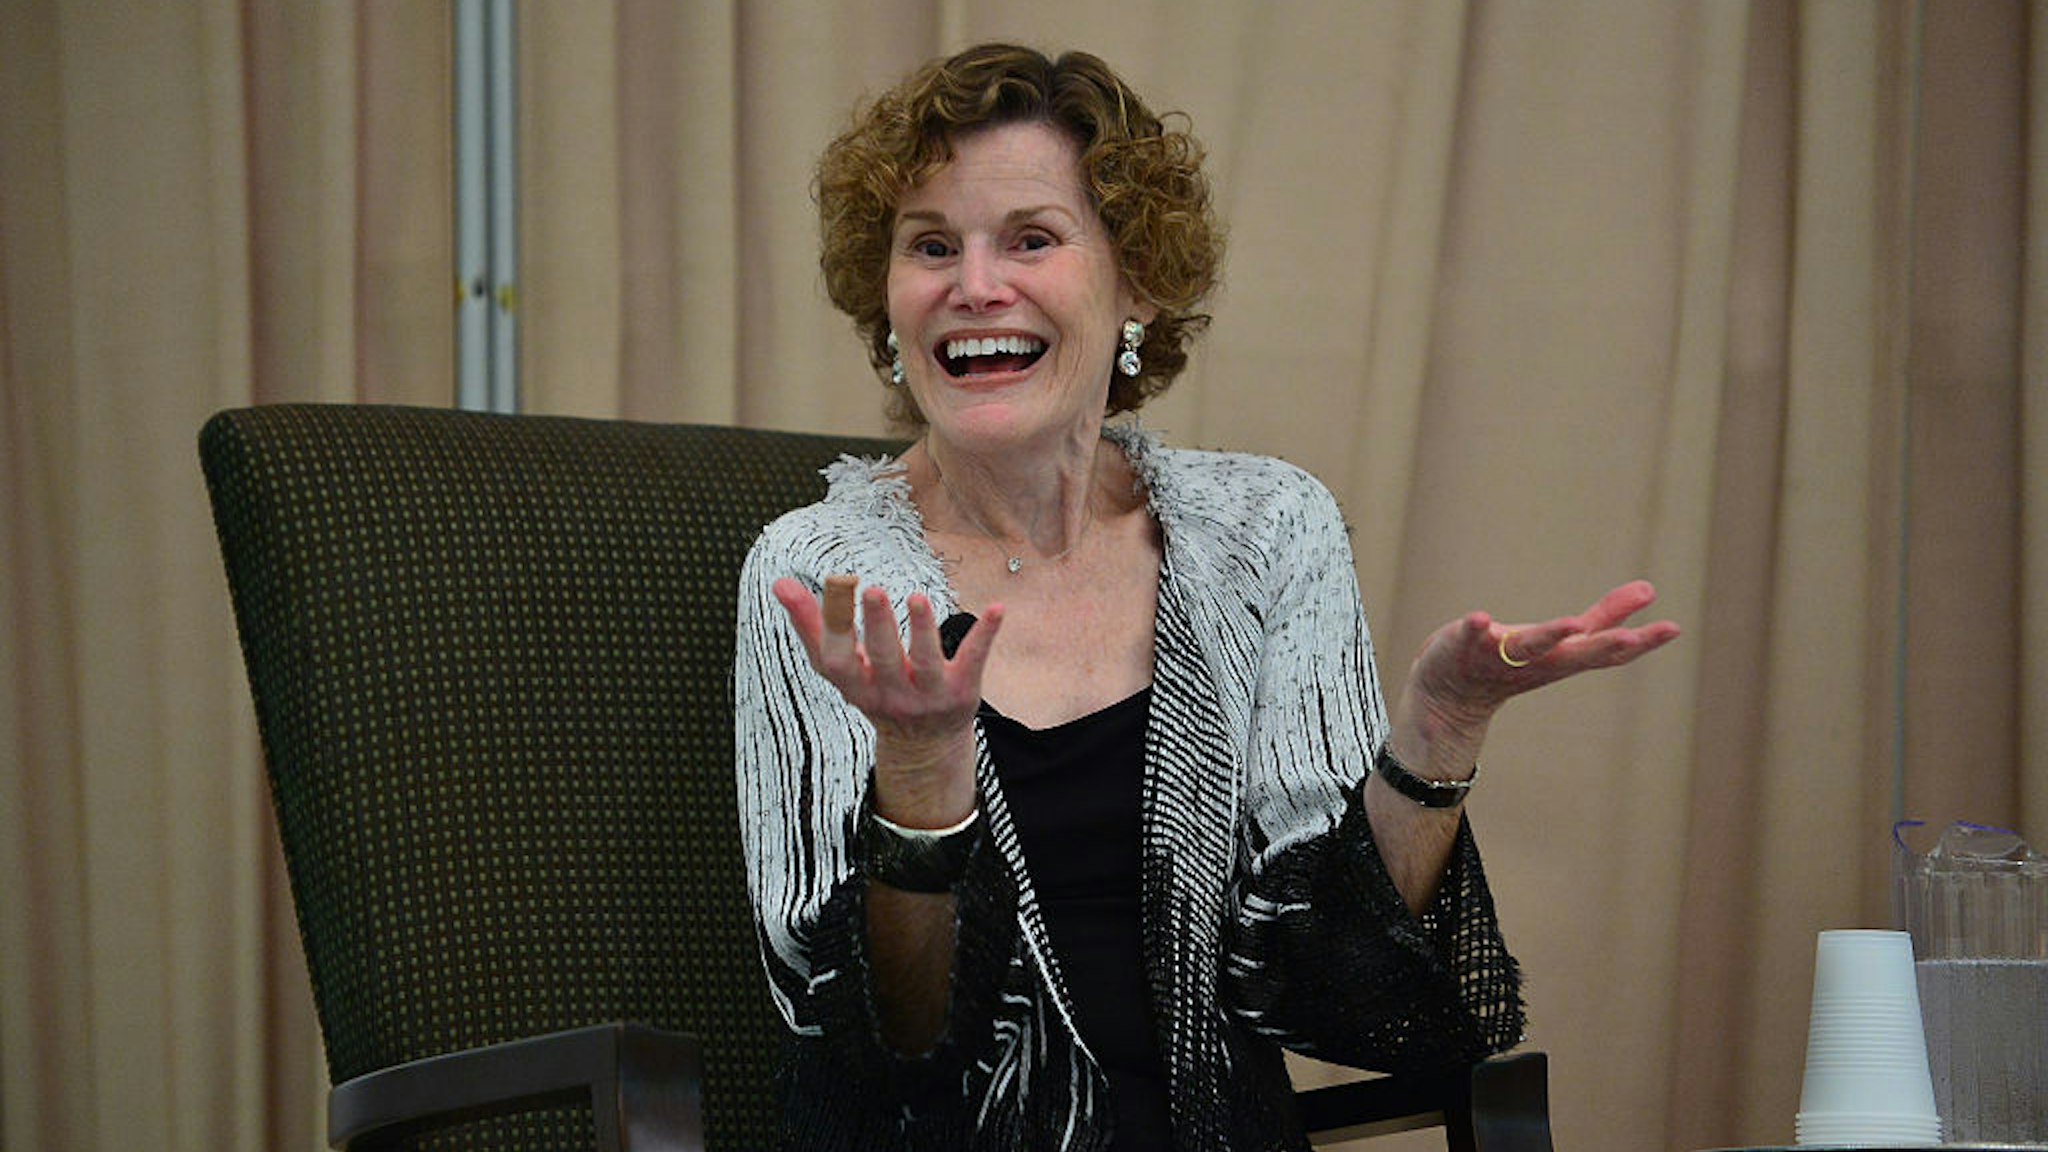 CORAL GABLES, FL - JUNE 15: Author Judy Blume In Conversation With WLRN's Alicia Zuckerman about Judy Blume new book "In the Unlikely Event" at Temple Judea on June 15, 2015 in Coral Gables, Florida. (Photo by Johnny Louis/WireImage)